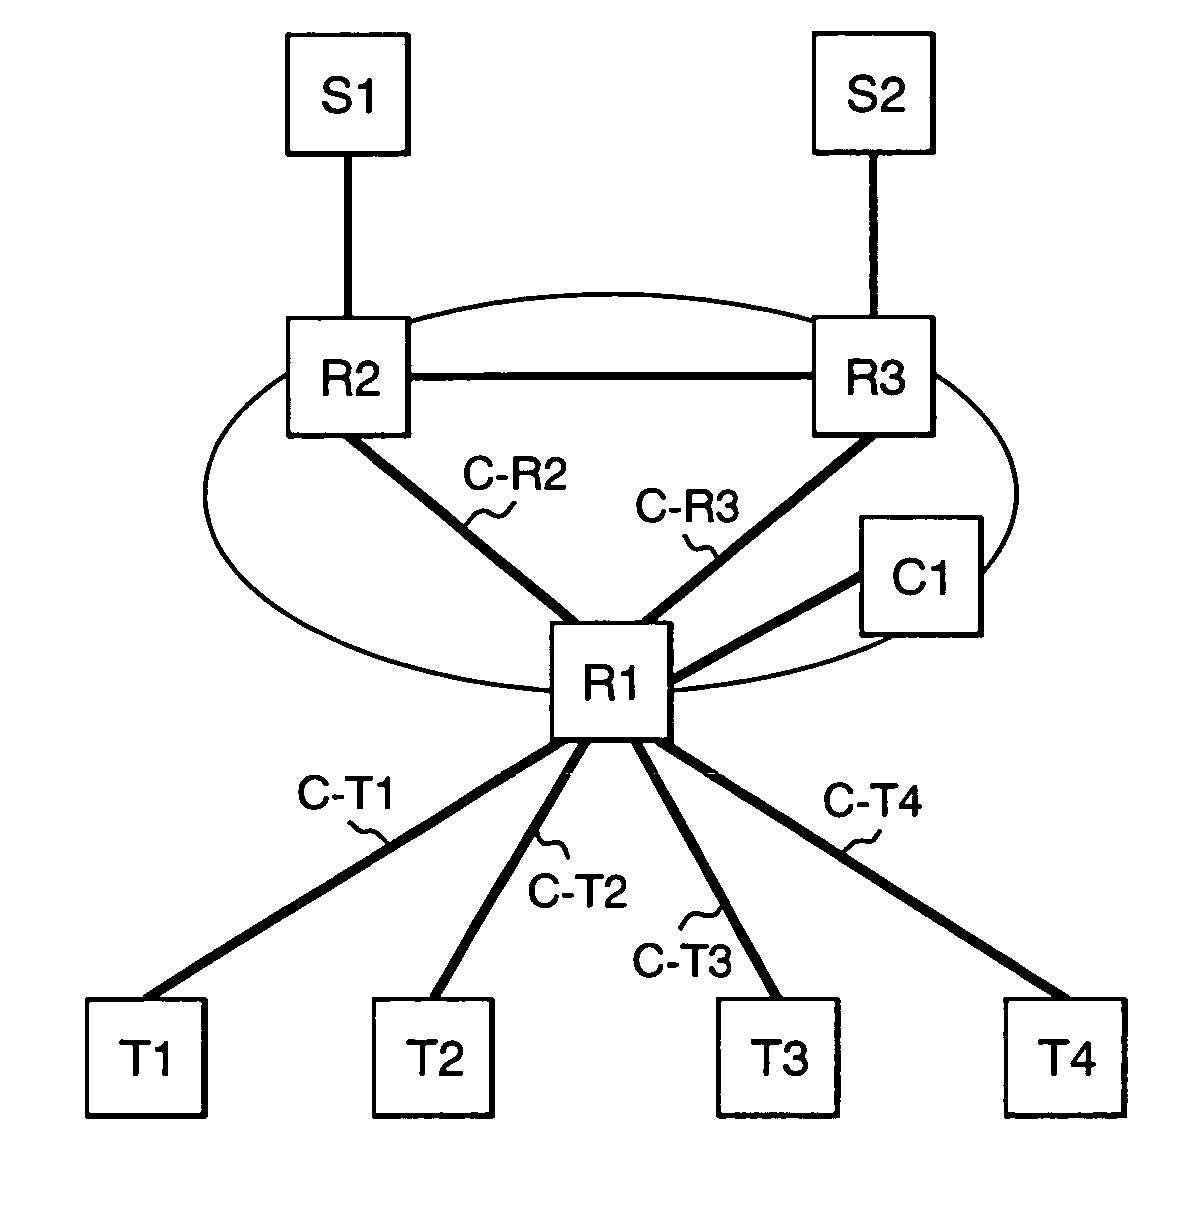 Communication statistic information collection apparatus